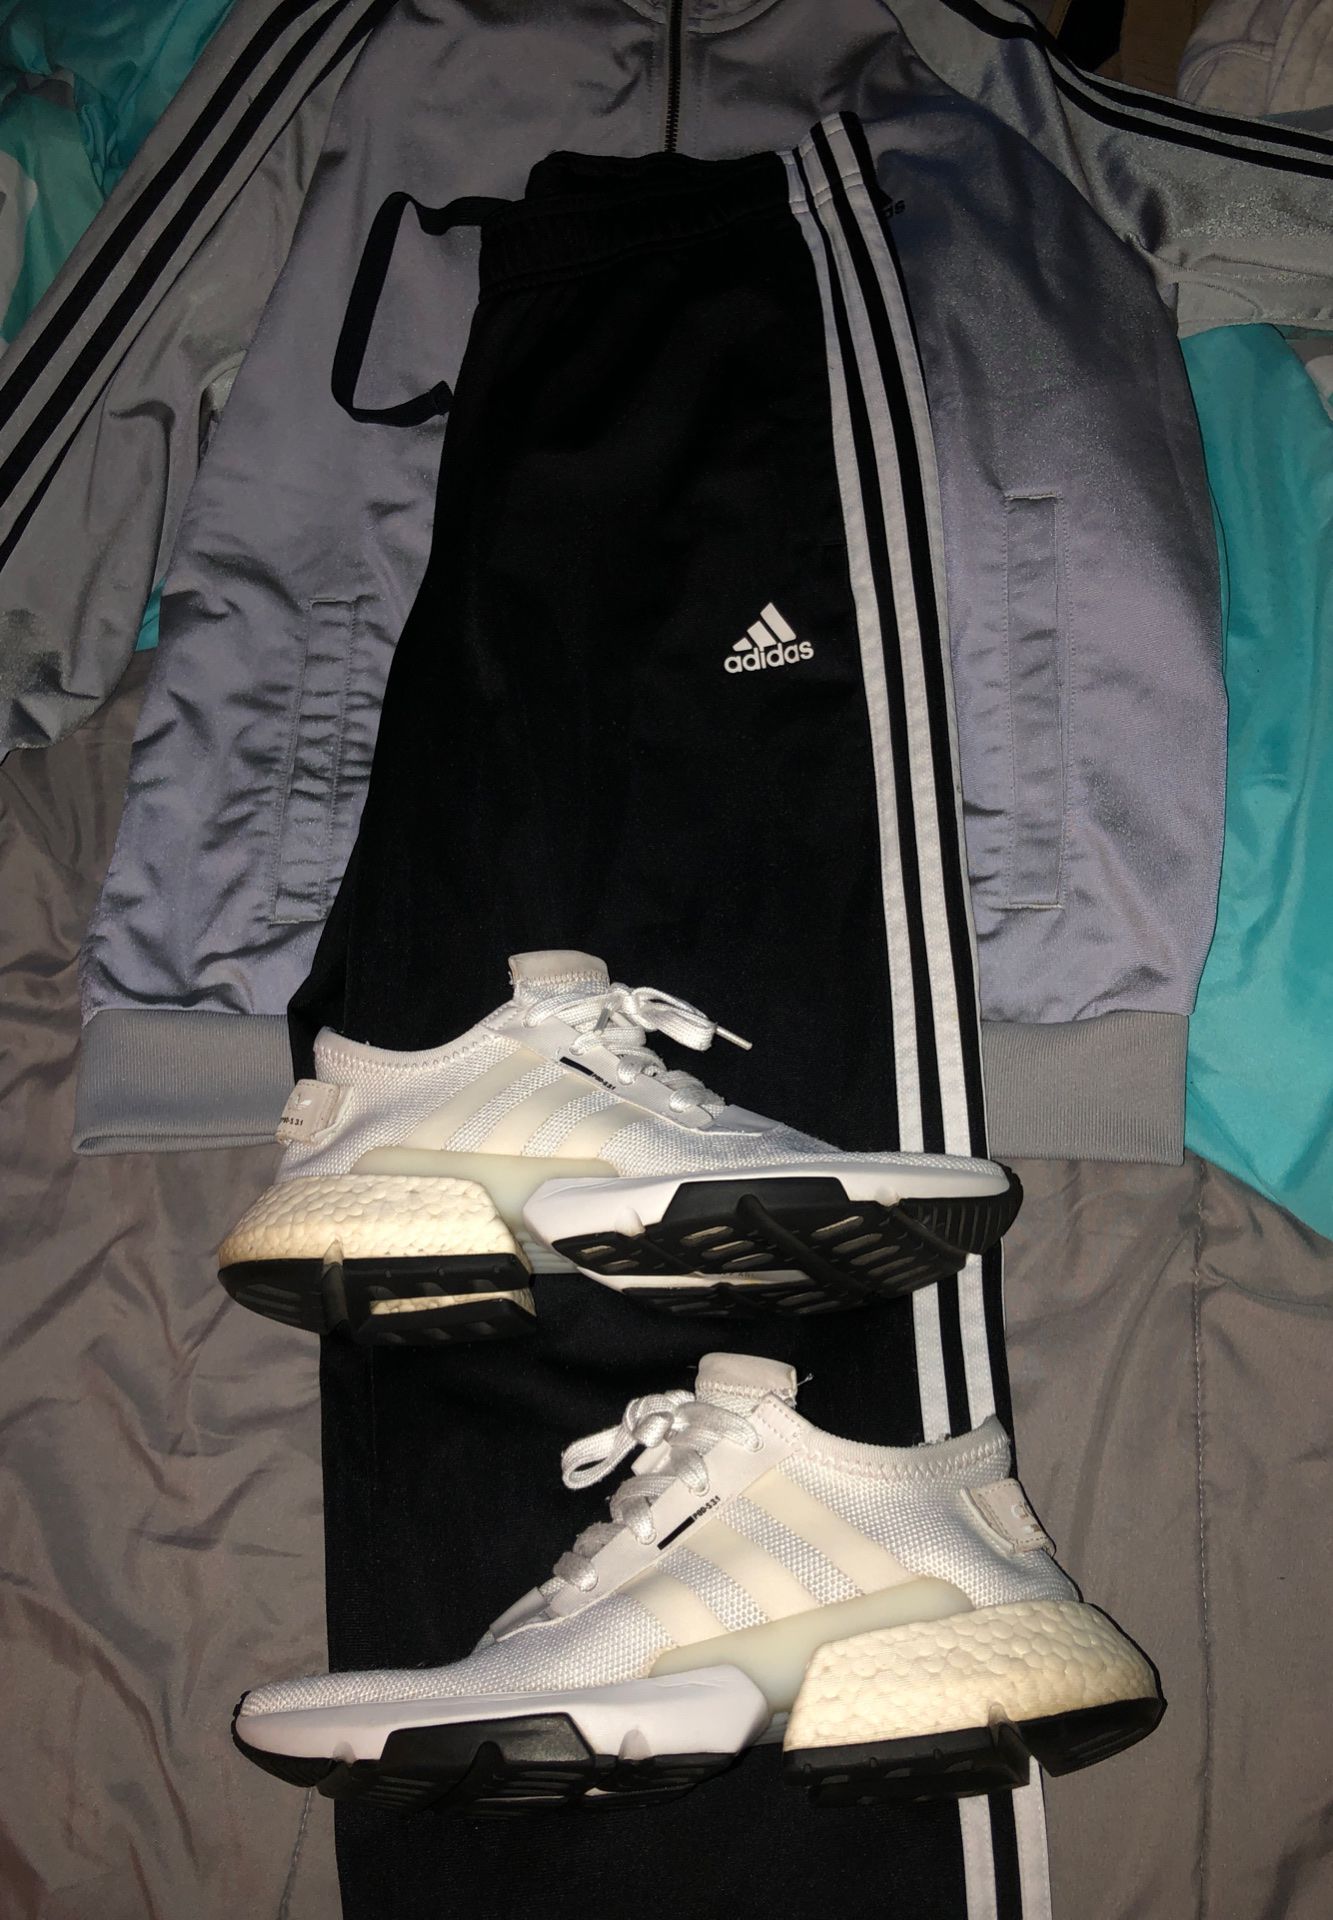 Adidas Tracksuit (M) and Adidas POD Shoes (Size 9)